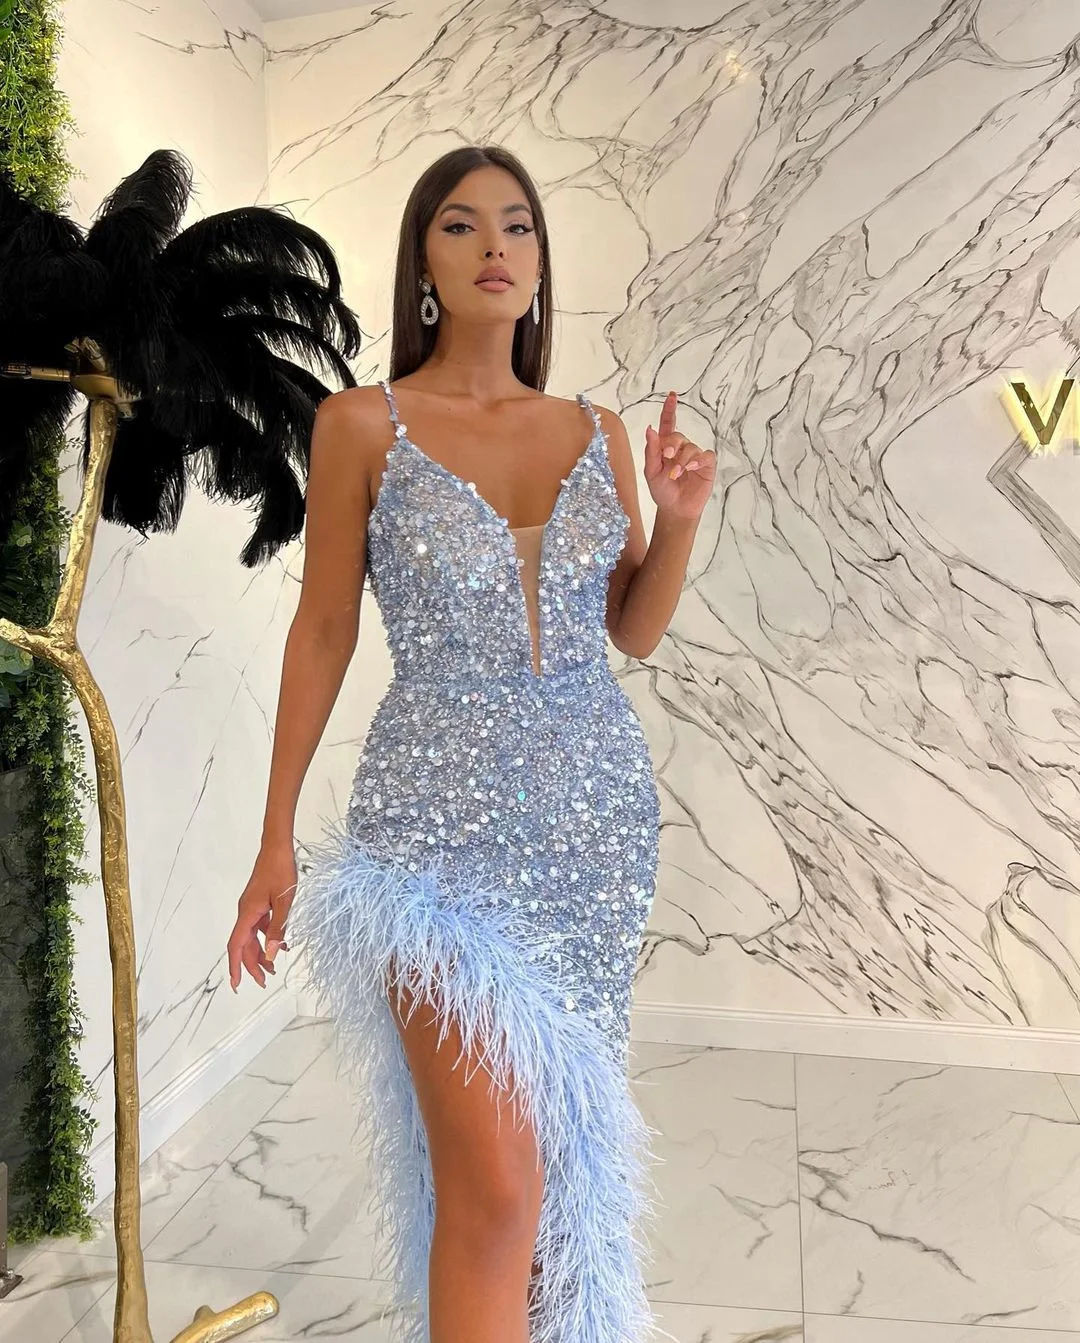 

Glitter Sequin Mermaid Prom Dresses VNeck Spaghetti Strap Tea Length Luxury Formal Evening Party Gowns 2023 With Feathers Custom